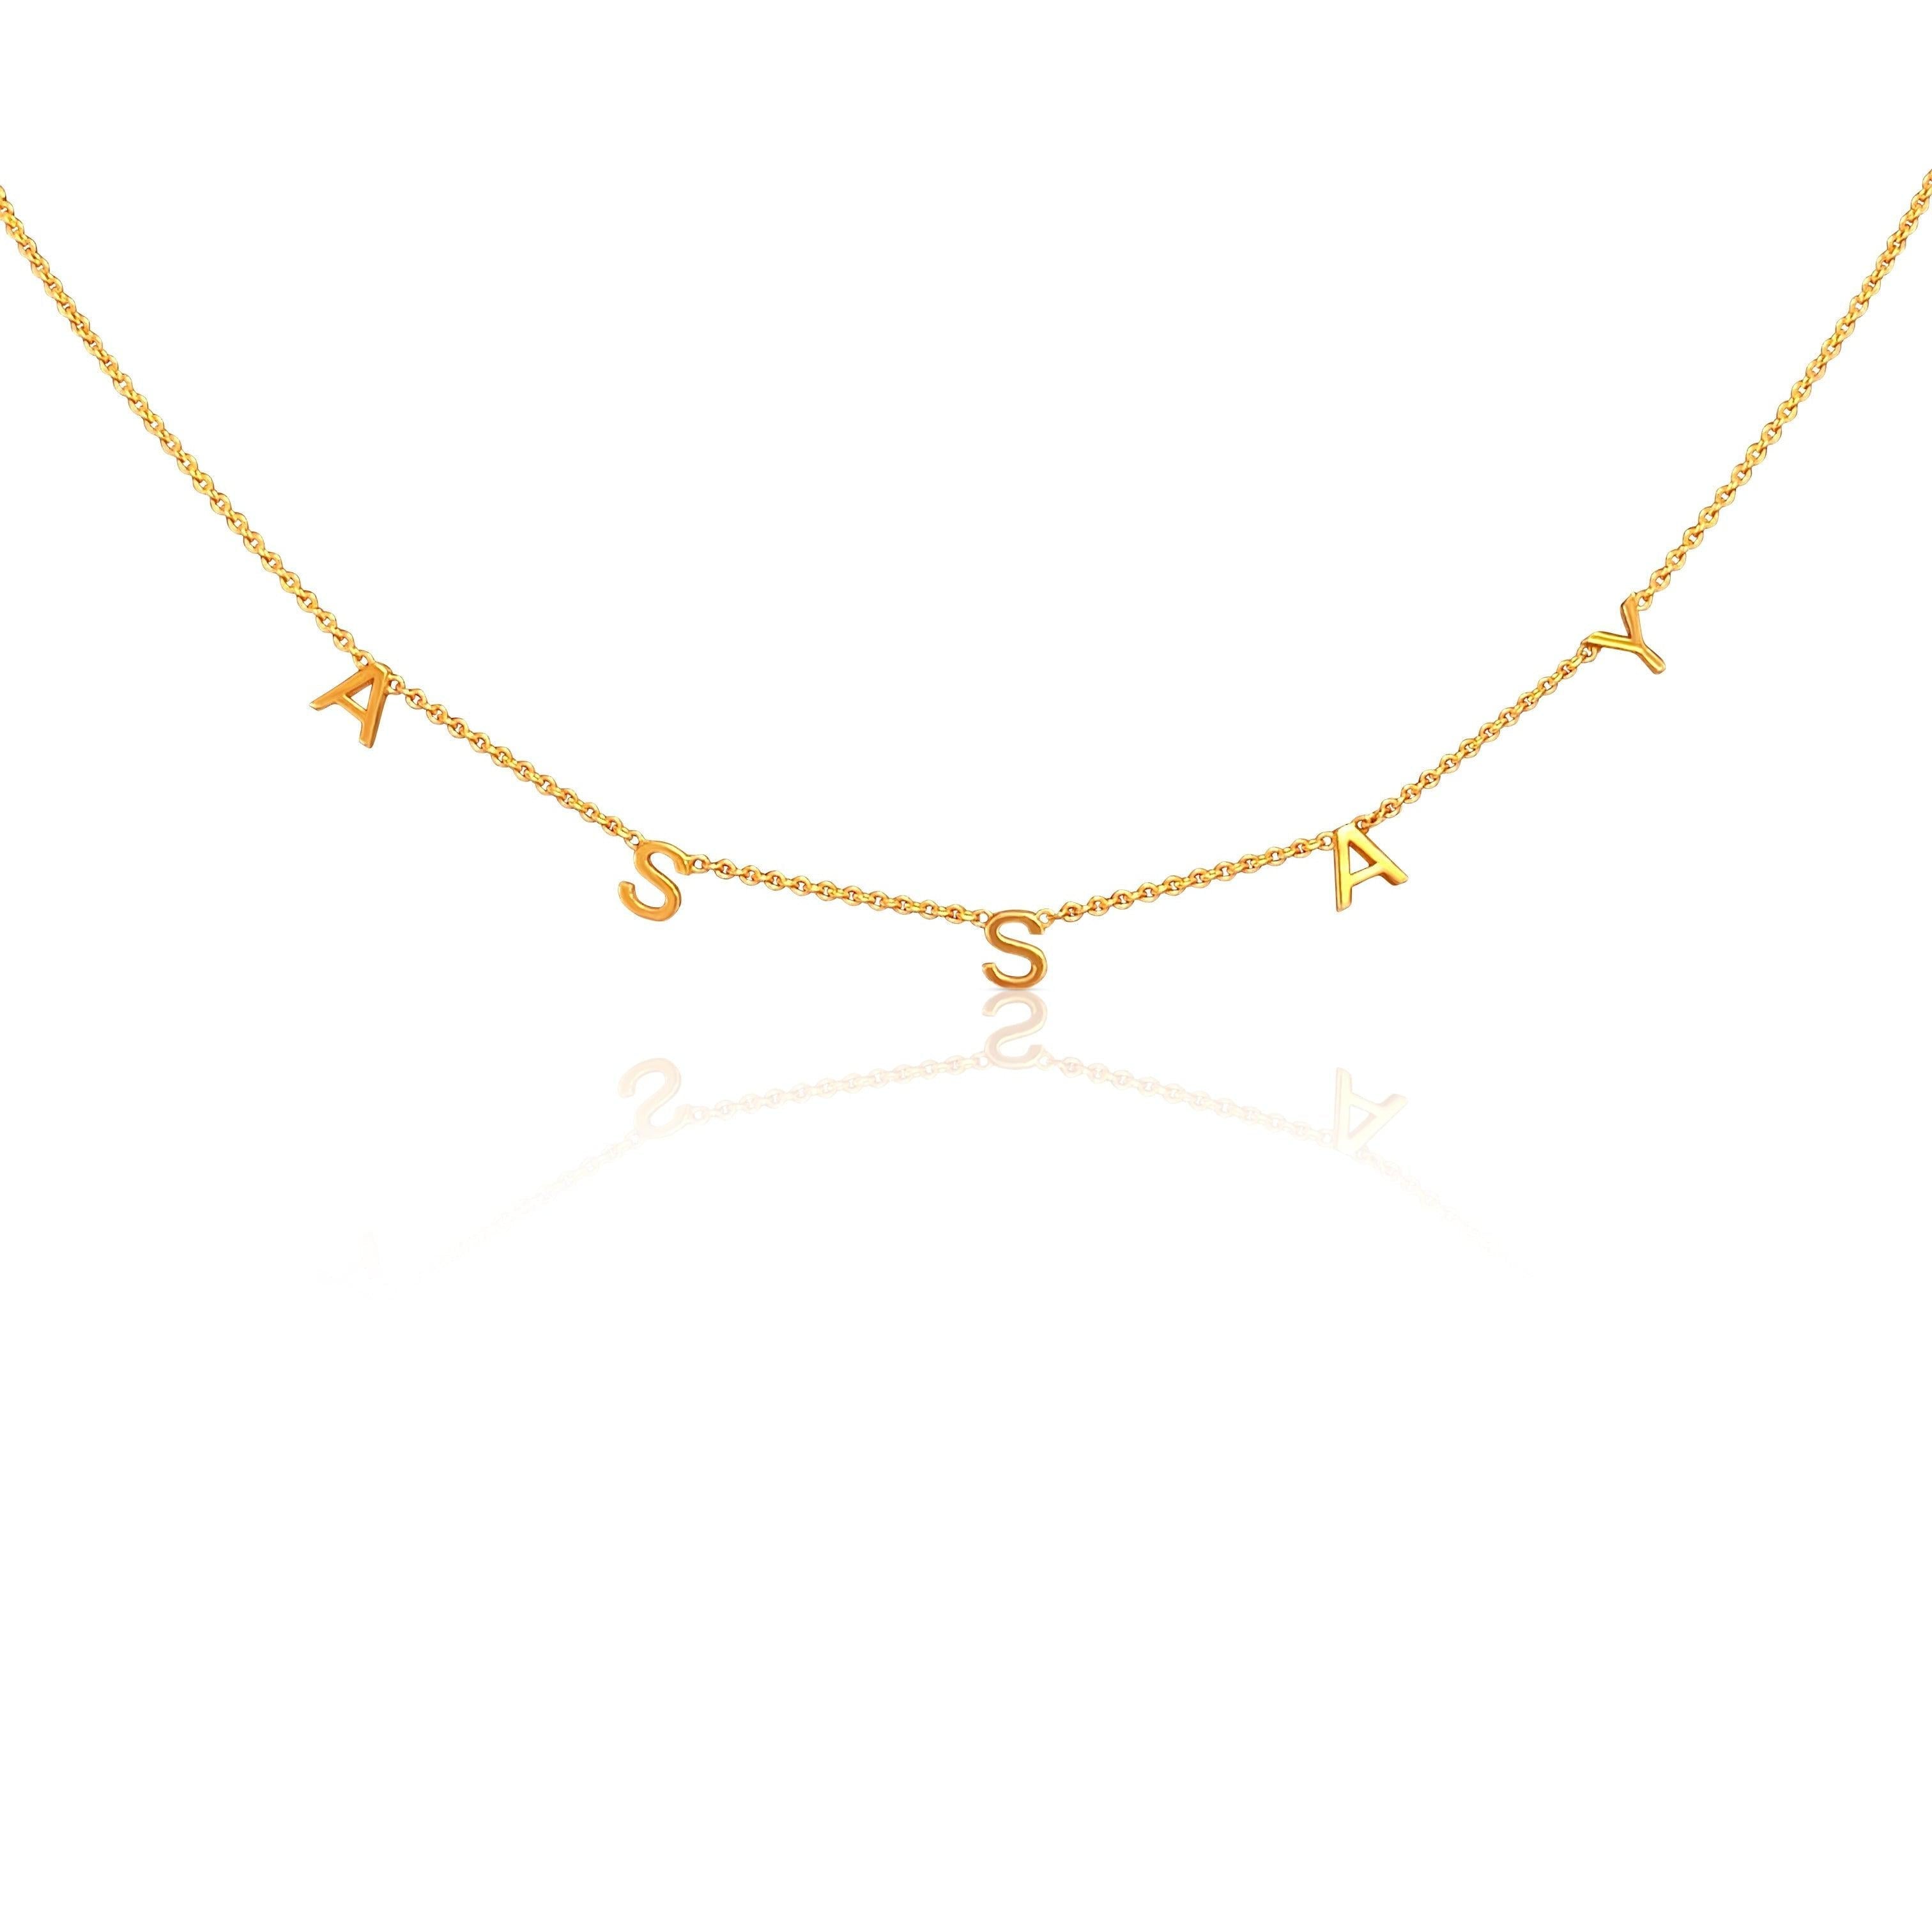 Personalized Name Necklace in 14k Solid Yellow Gold With Integrated Letters-ASSAY